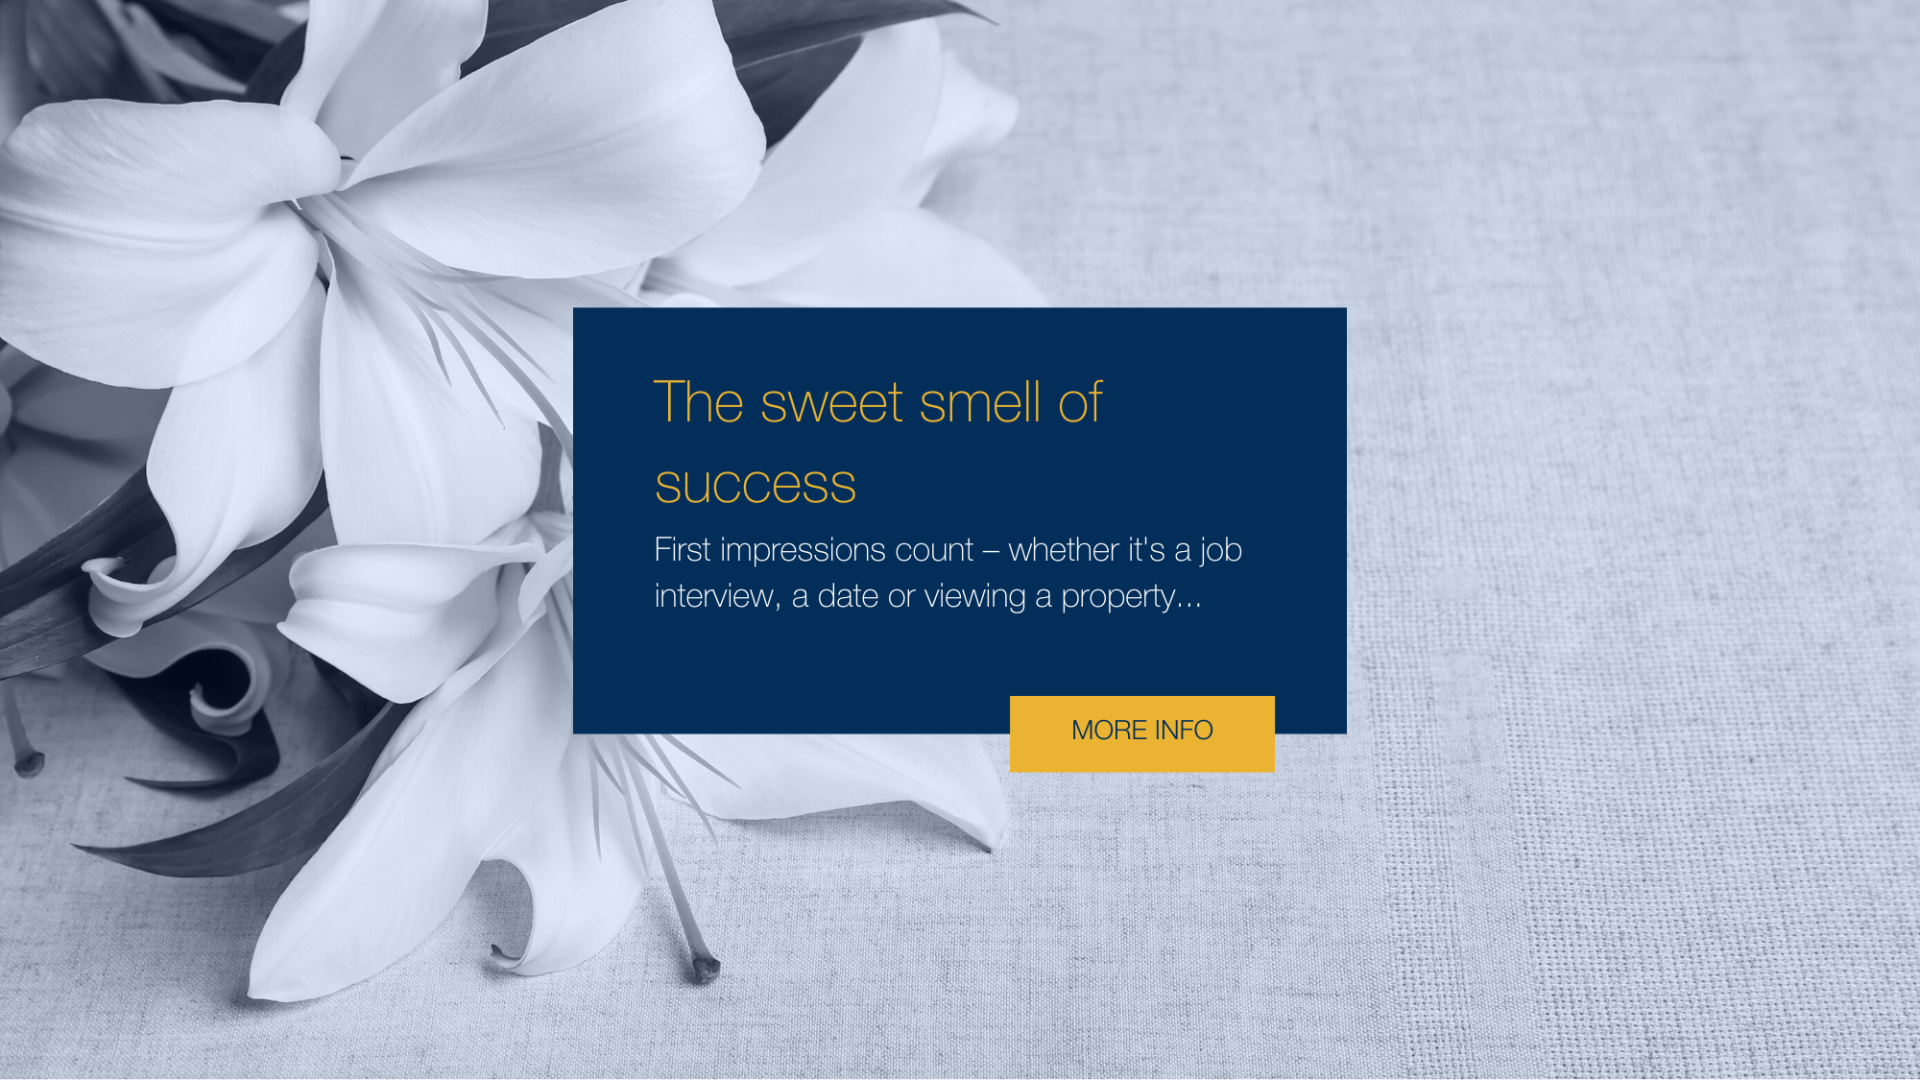 The sweet smell of success